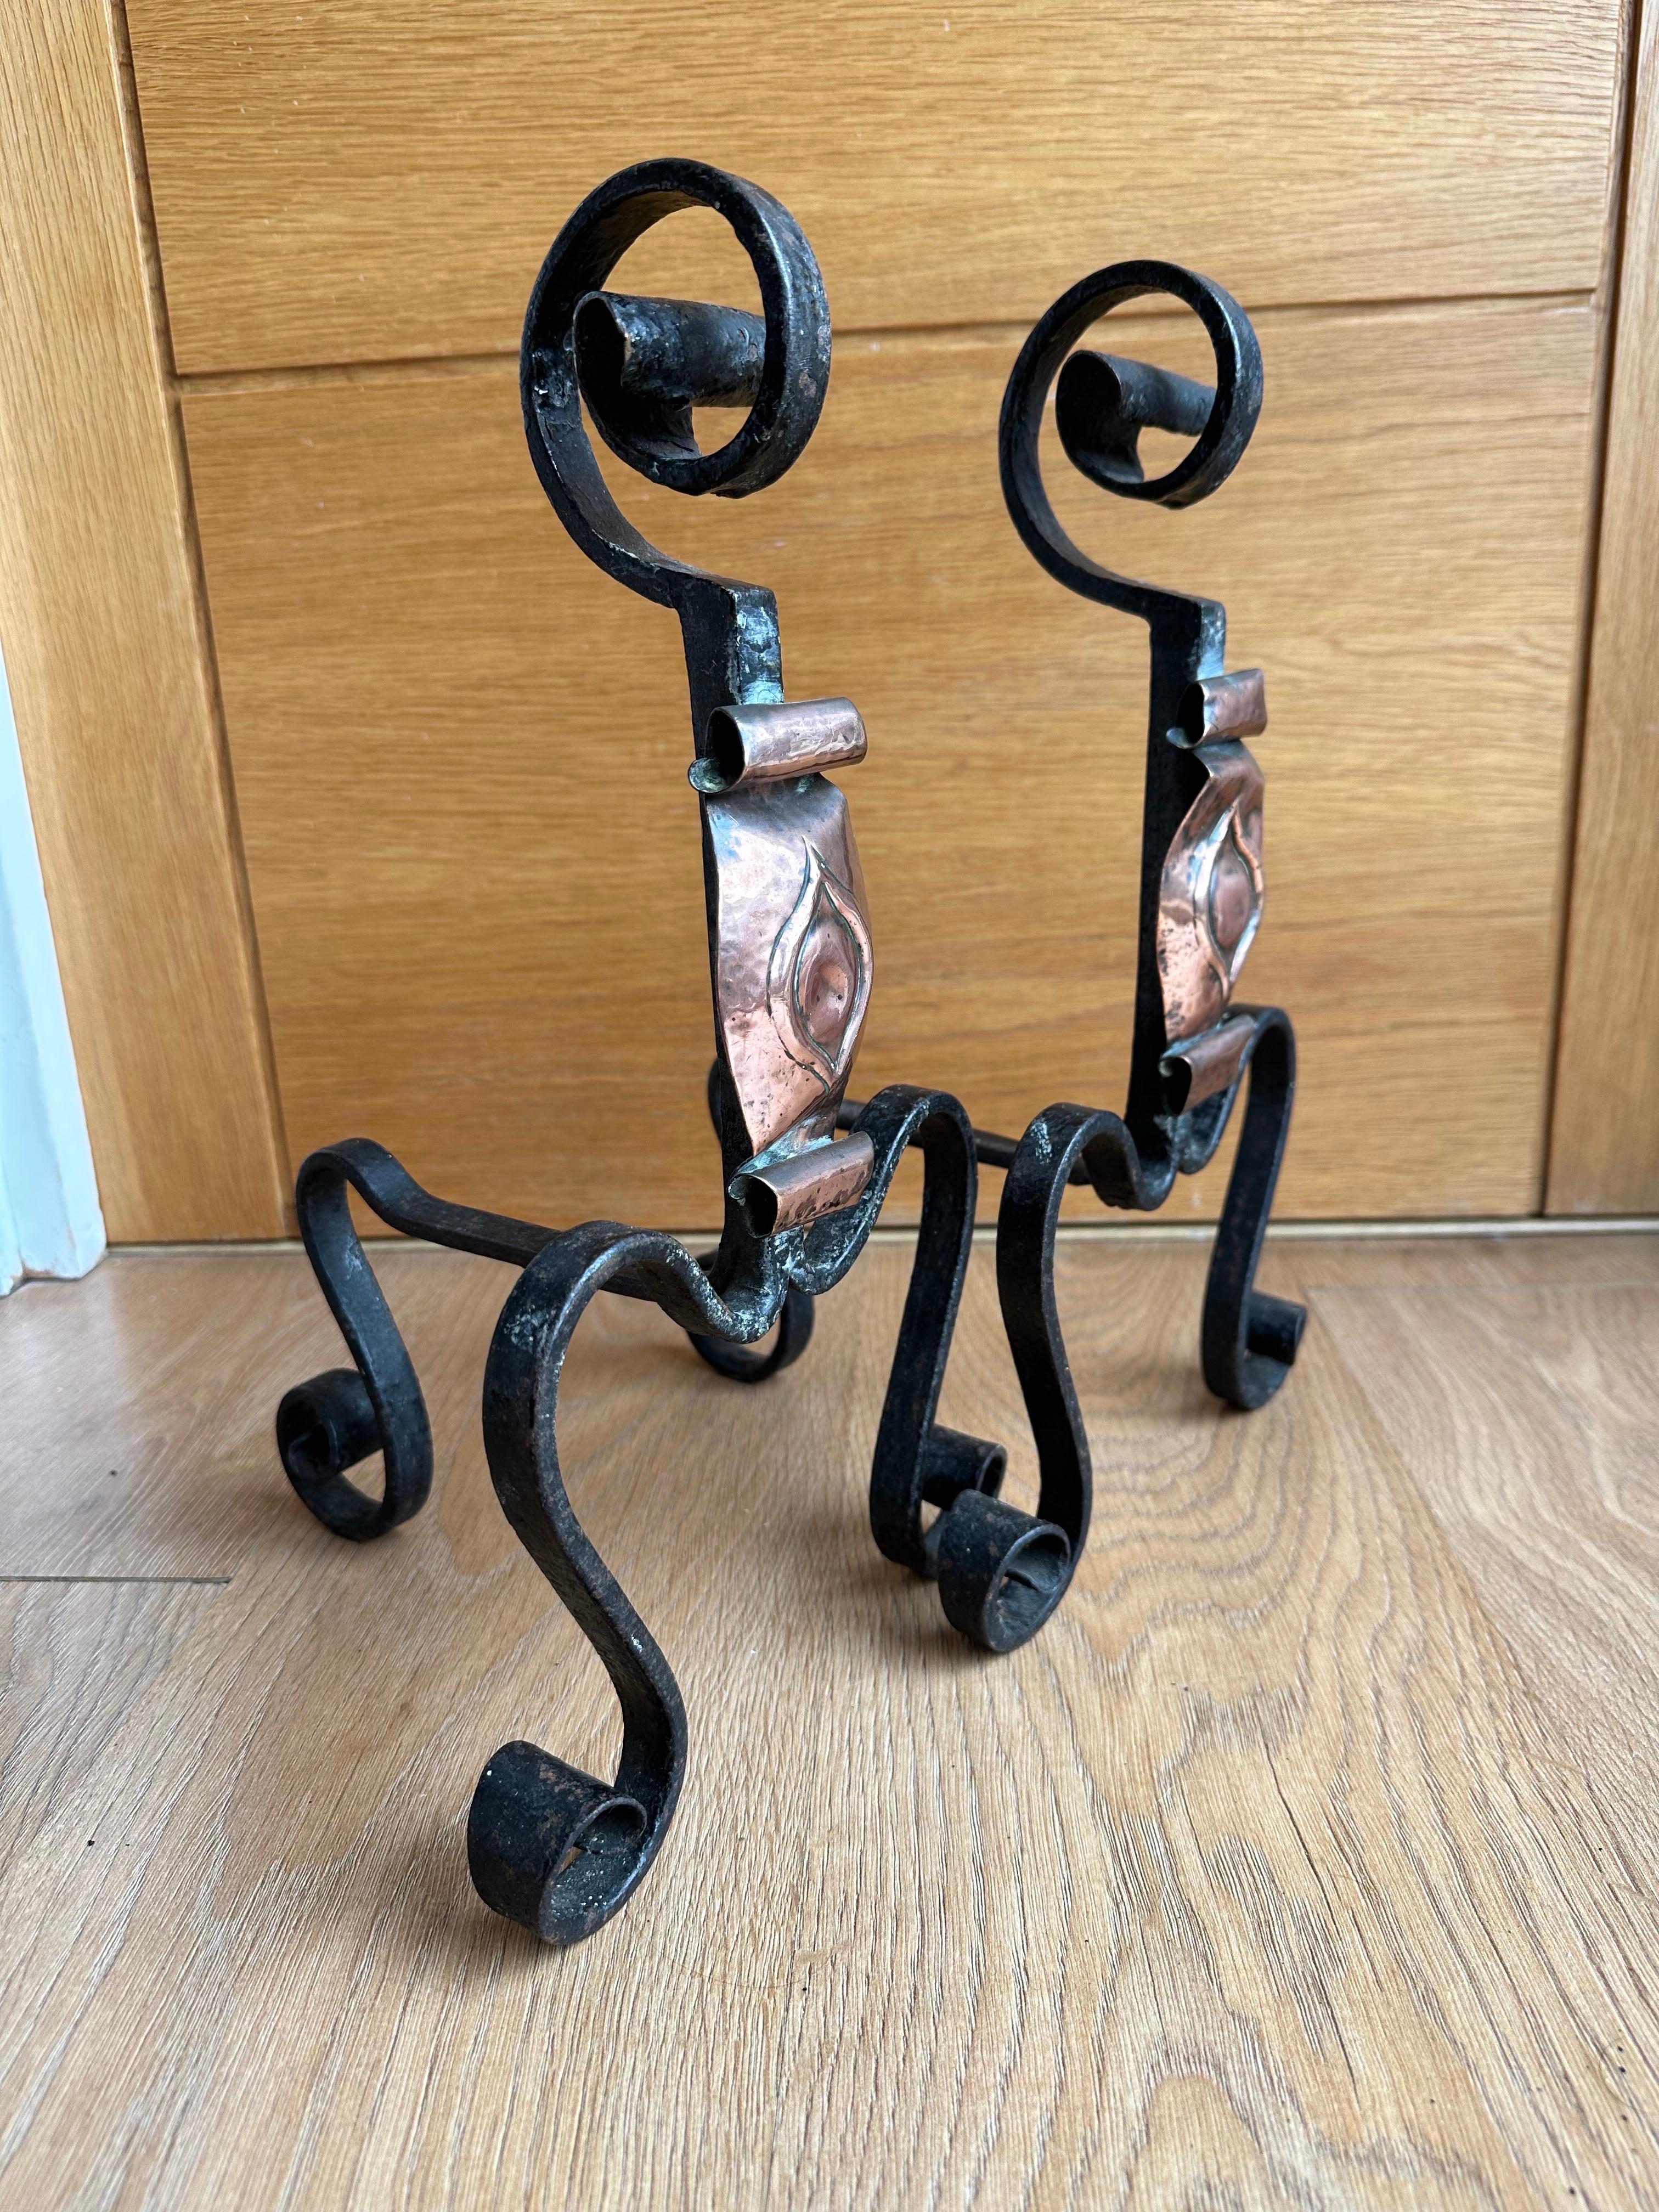 A beautiful pair of Handwrought Iron and Copper Gothic Fireplace Andirons Firedogs, 19th Century. This pair are completely wrought by hand out of very thick iron and have a dark black finish, crafted with swirled legs and shafts with beautifully